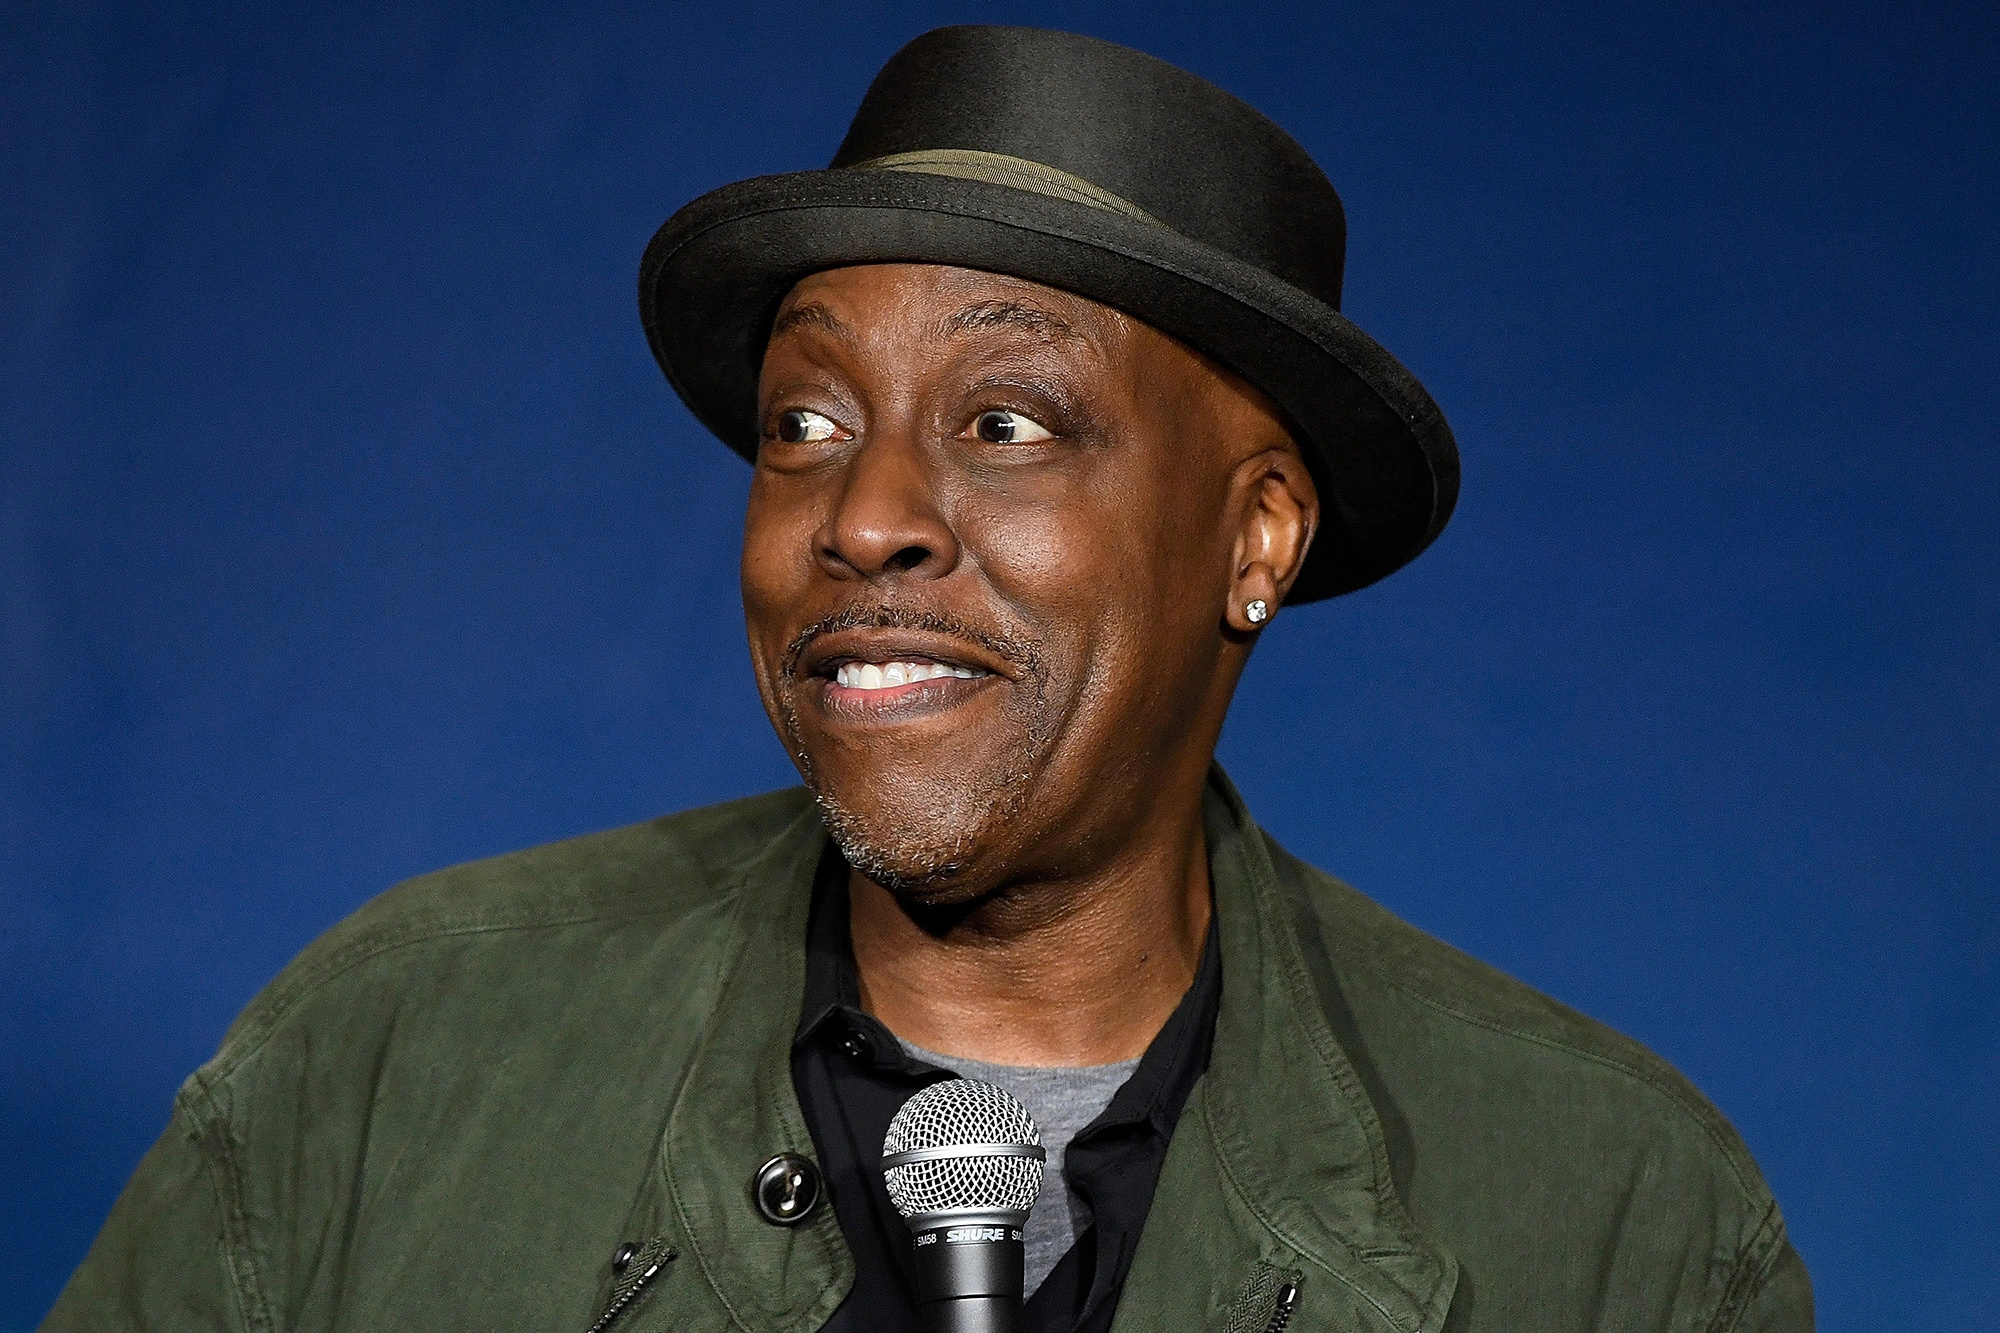 Arsenio Hall: Appeared on Real Time with Bill Maher in May 2012. 2000x1340 HD Wallpaper.